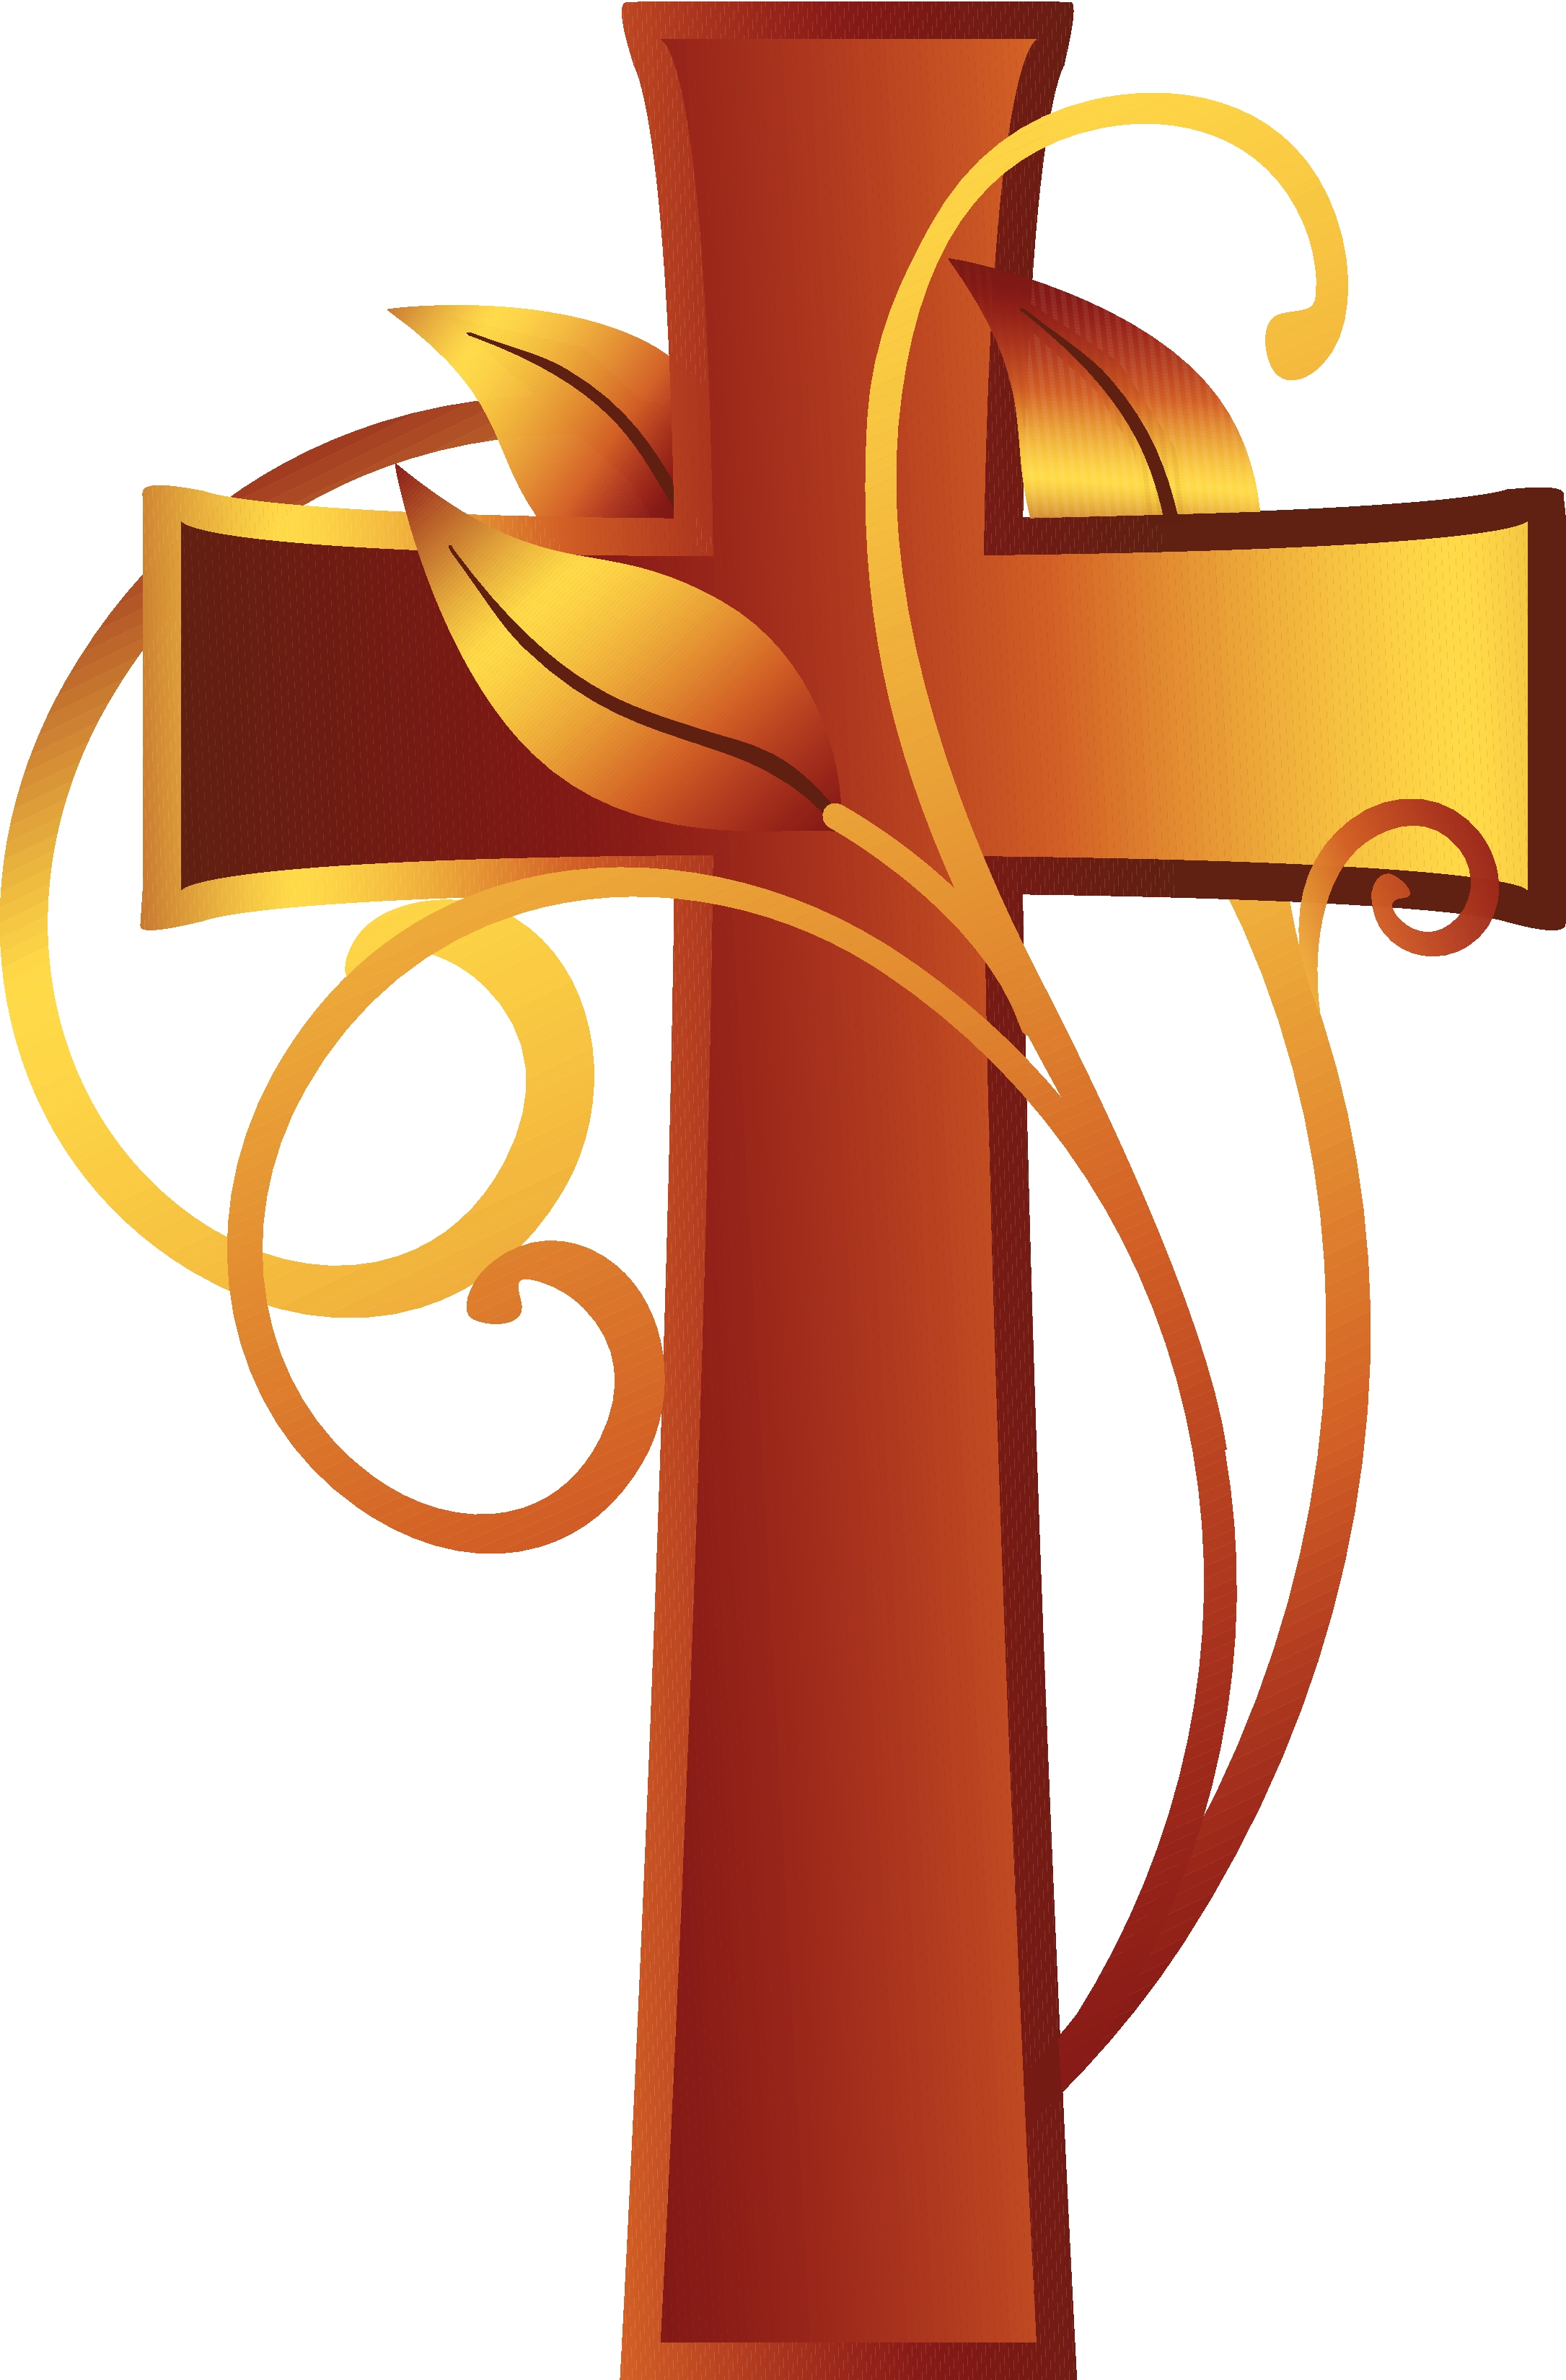 Christmas   Holiday Liturgy Resources   Franciscans For Justice